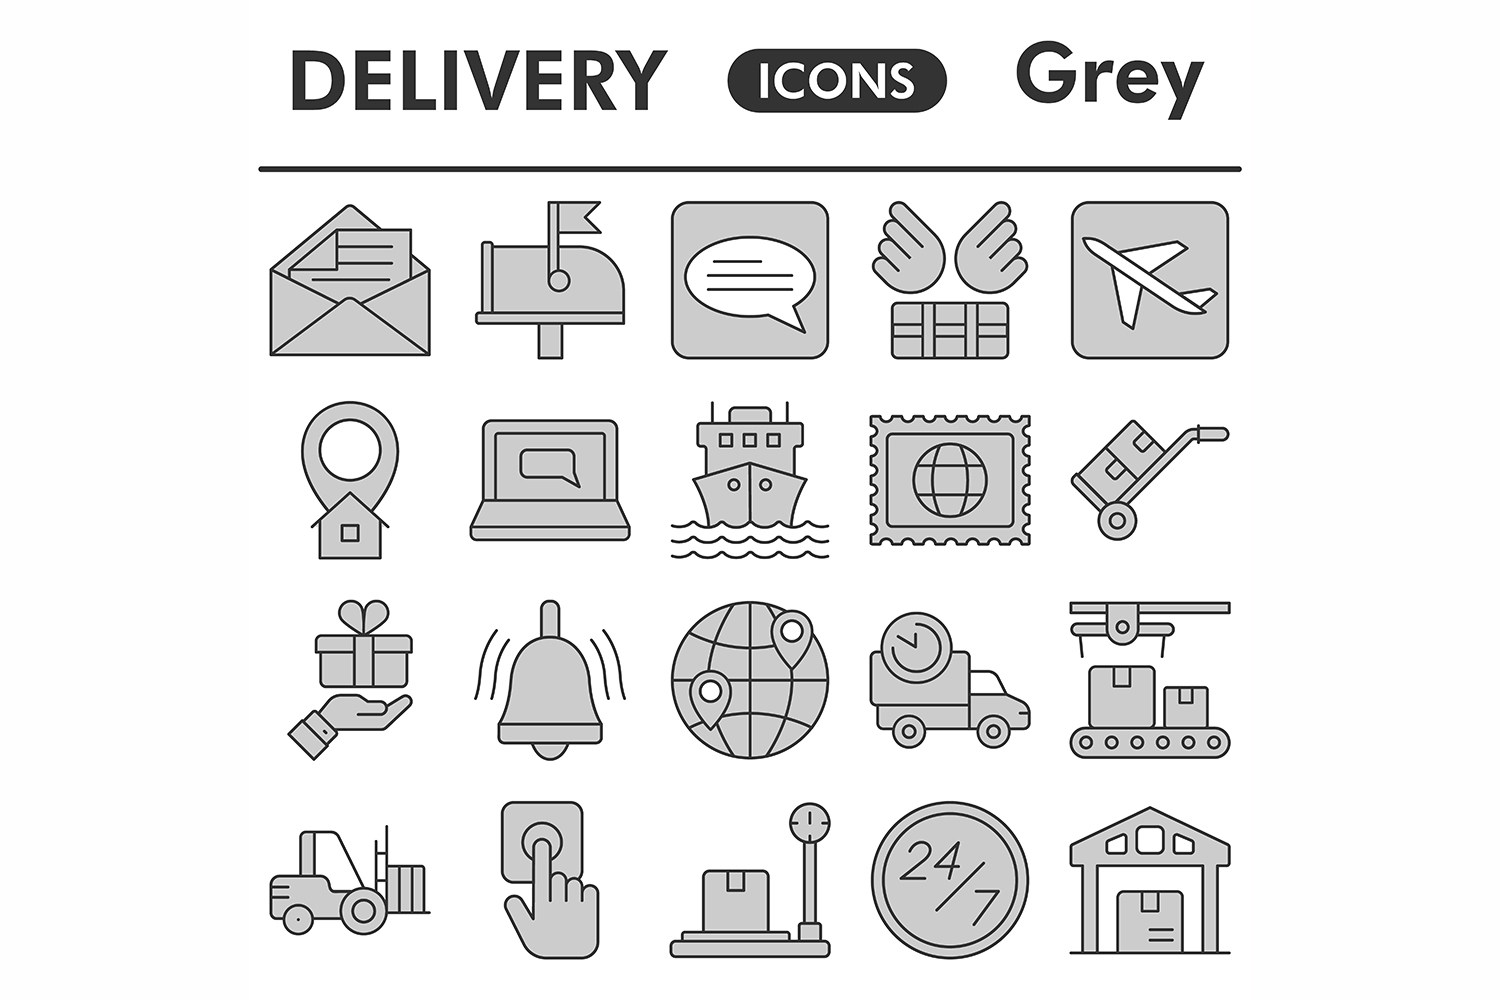 Delivery icons set, gray style pinterest preview image.